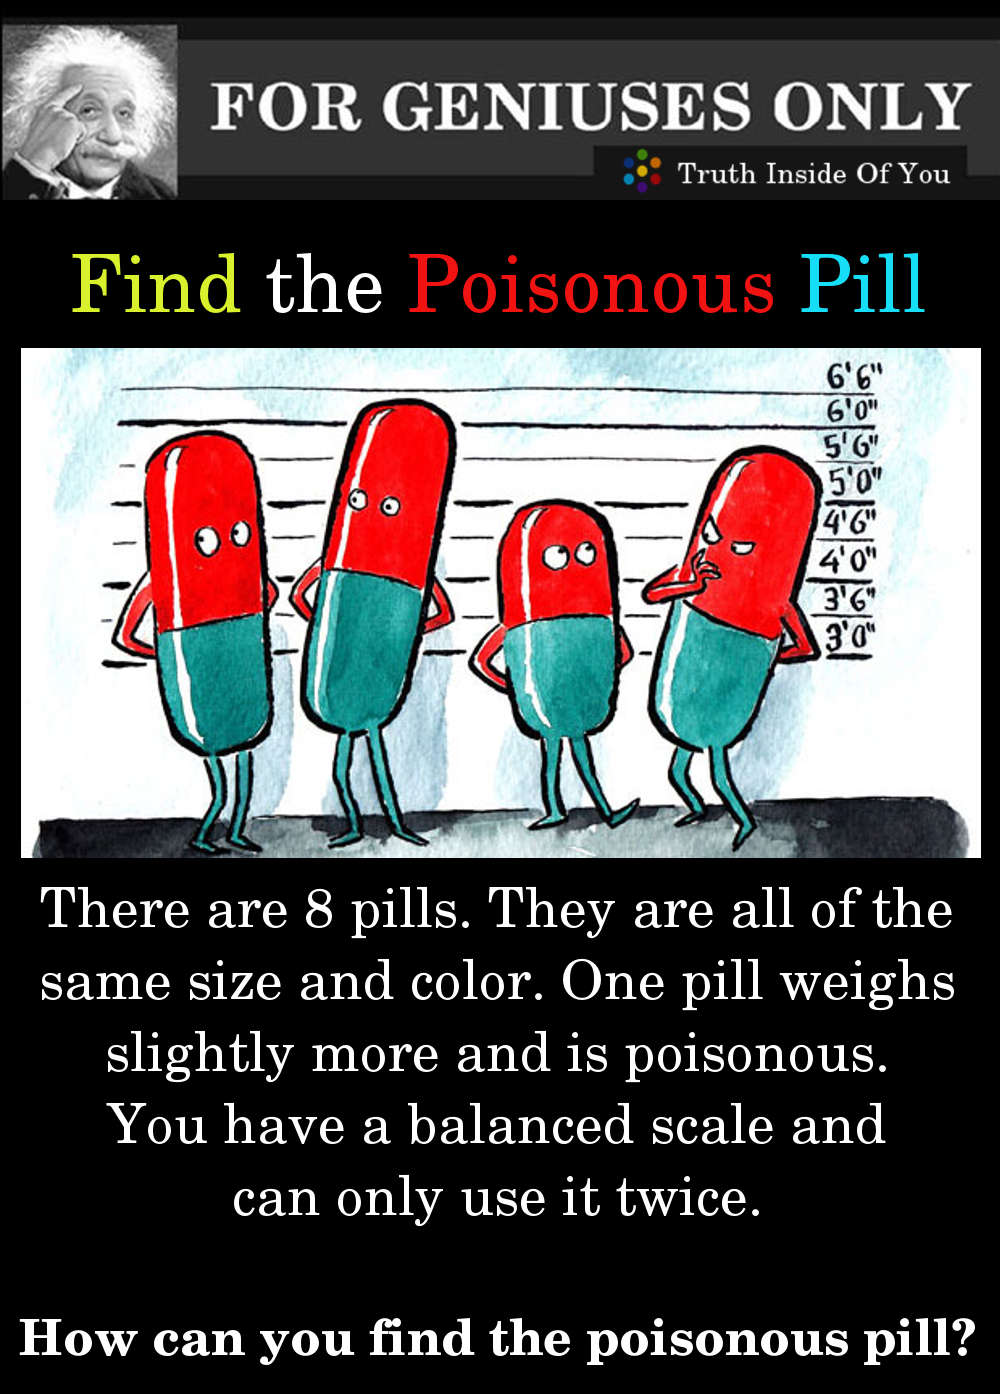 Find the Poisonous Pill